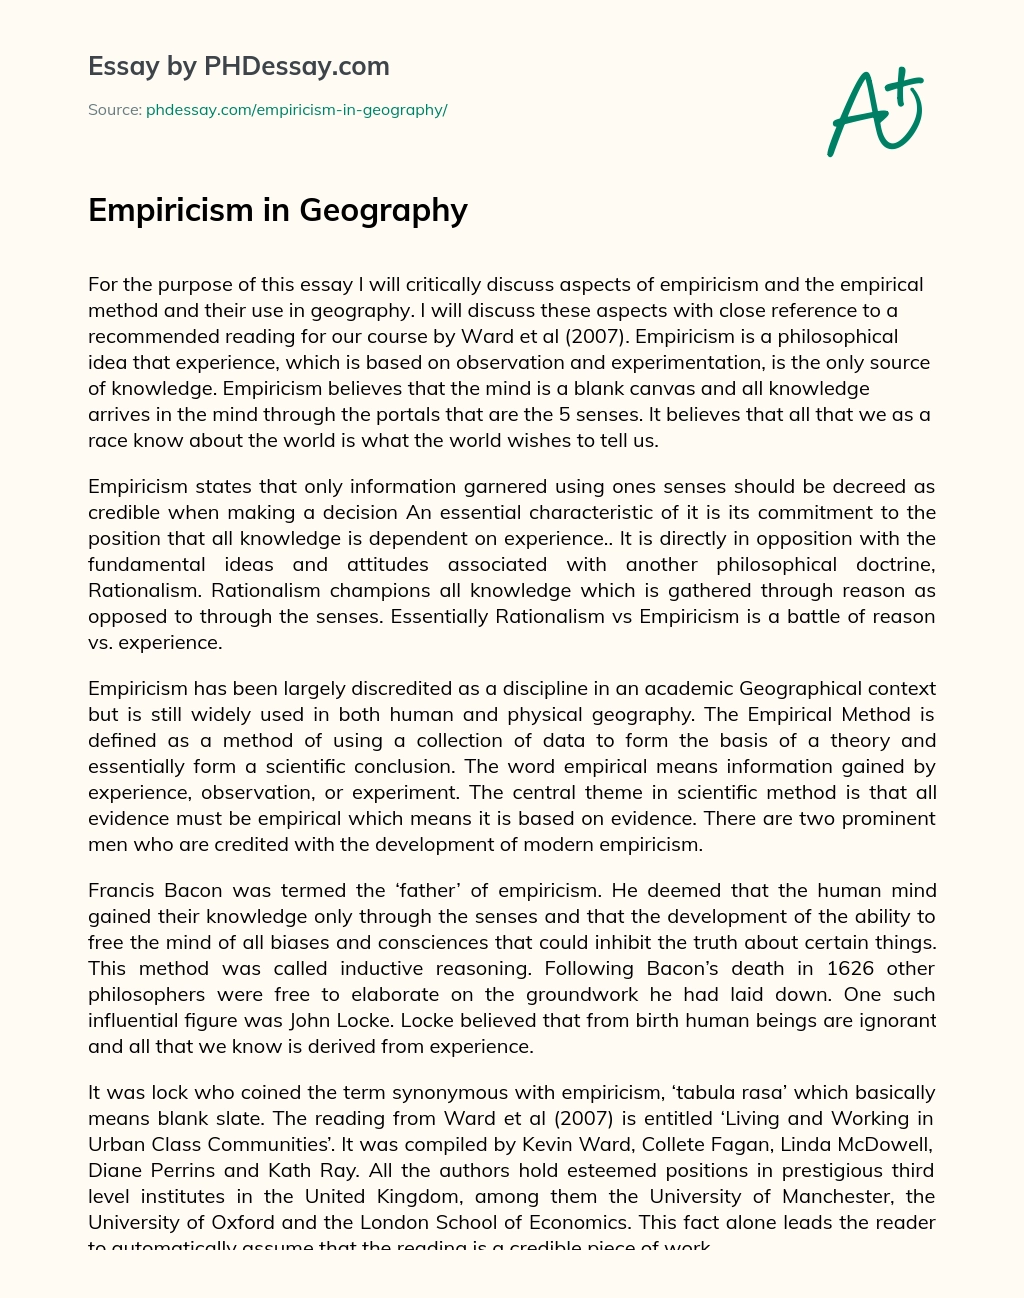 Empiricism in Geography essay